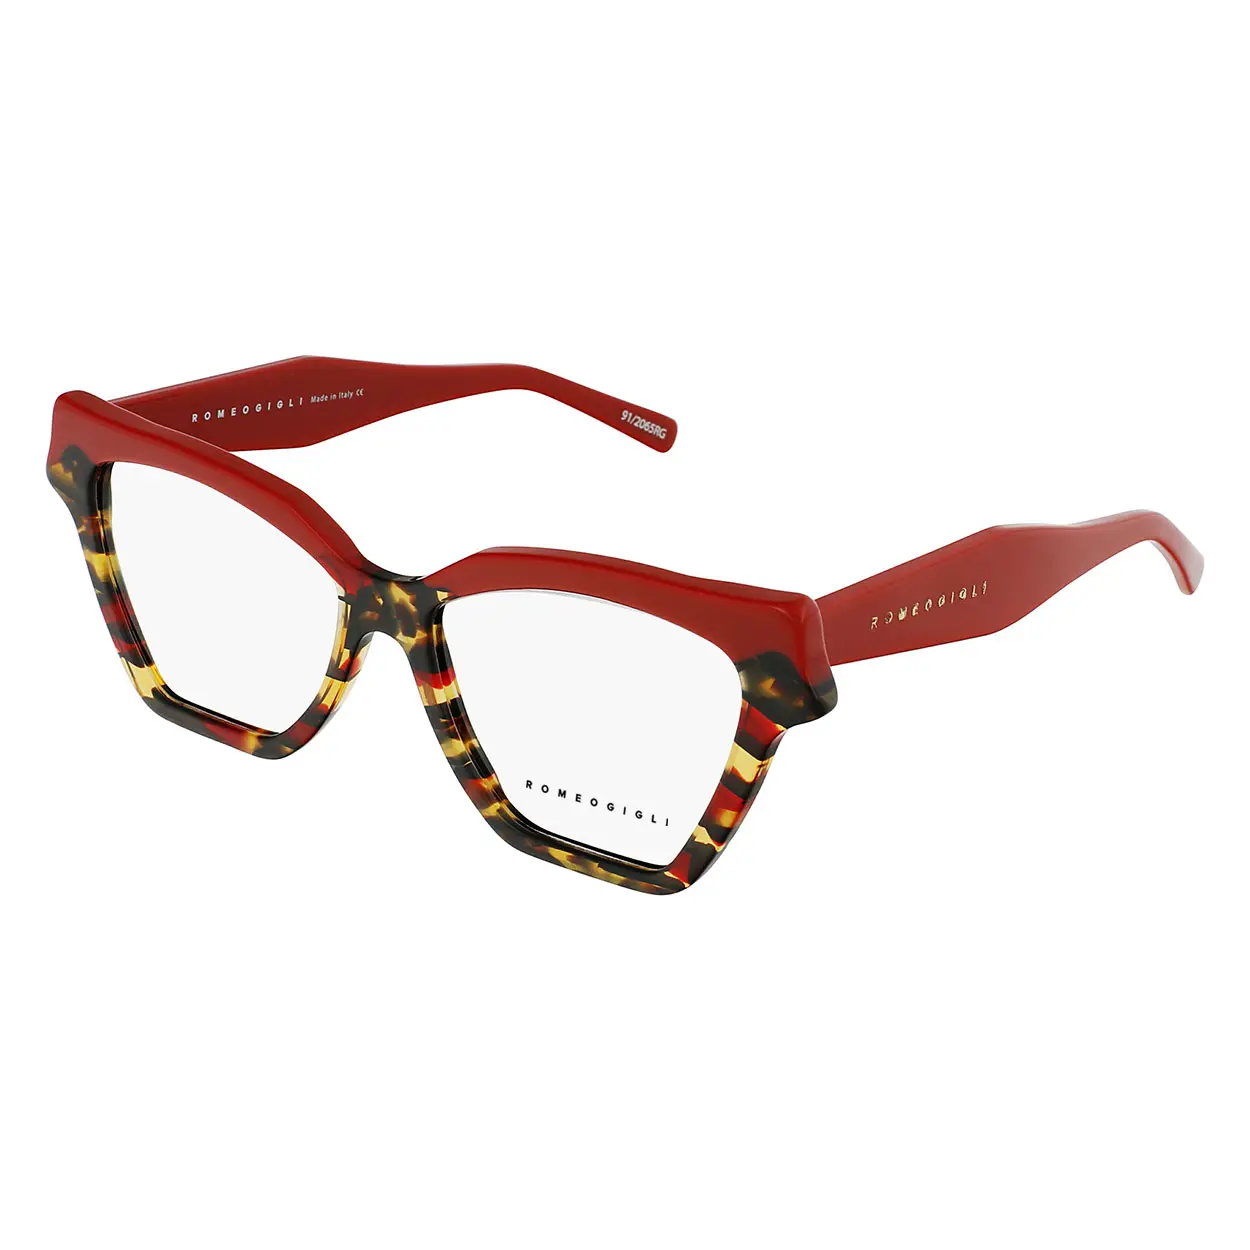 CAT-EYE FANTASY BROWN AND RED OPTICAL FRAME TEMPLES FOR EXQUISITE WOMAN LUXURY RGV.16D-PP RED 53-21-145